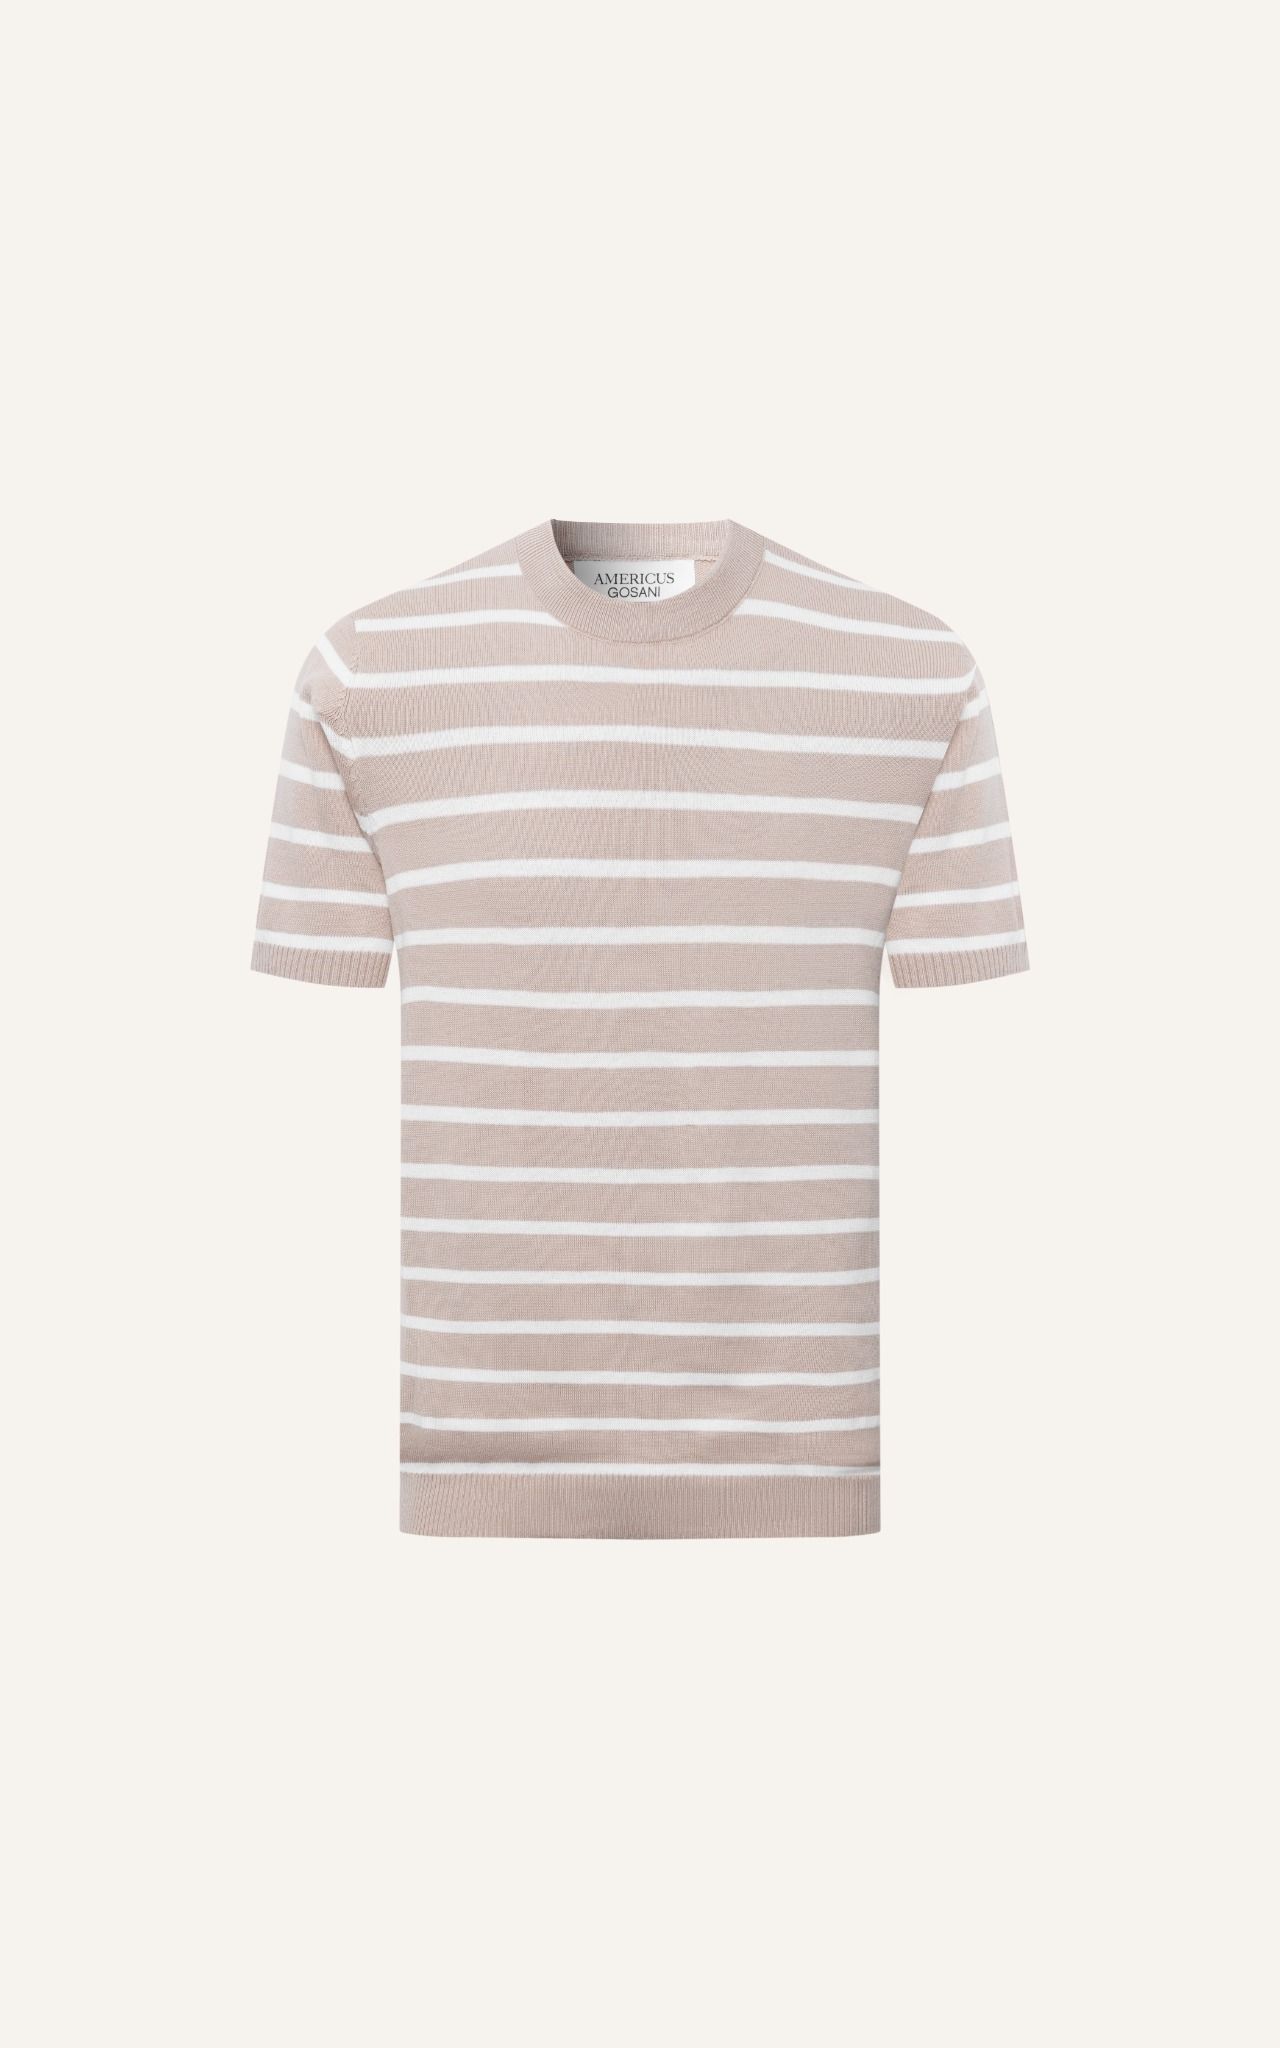  AG51 FACTORY REGULAR FIT STRIPED KNIT POLO - BEIGE 